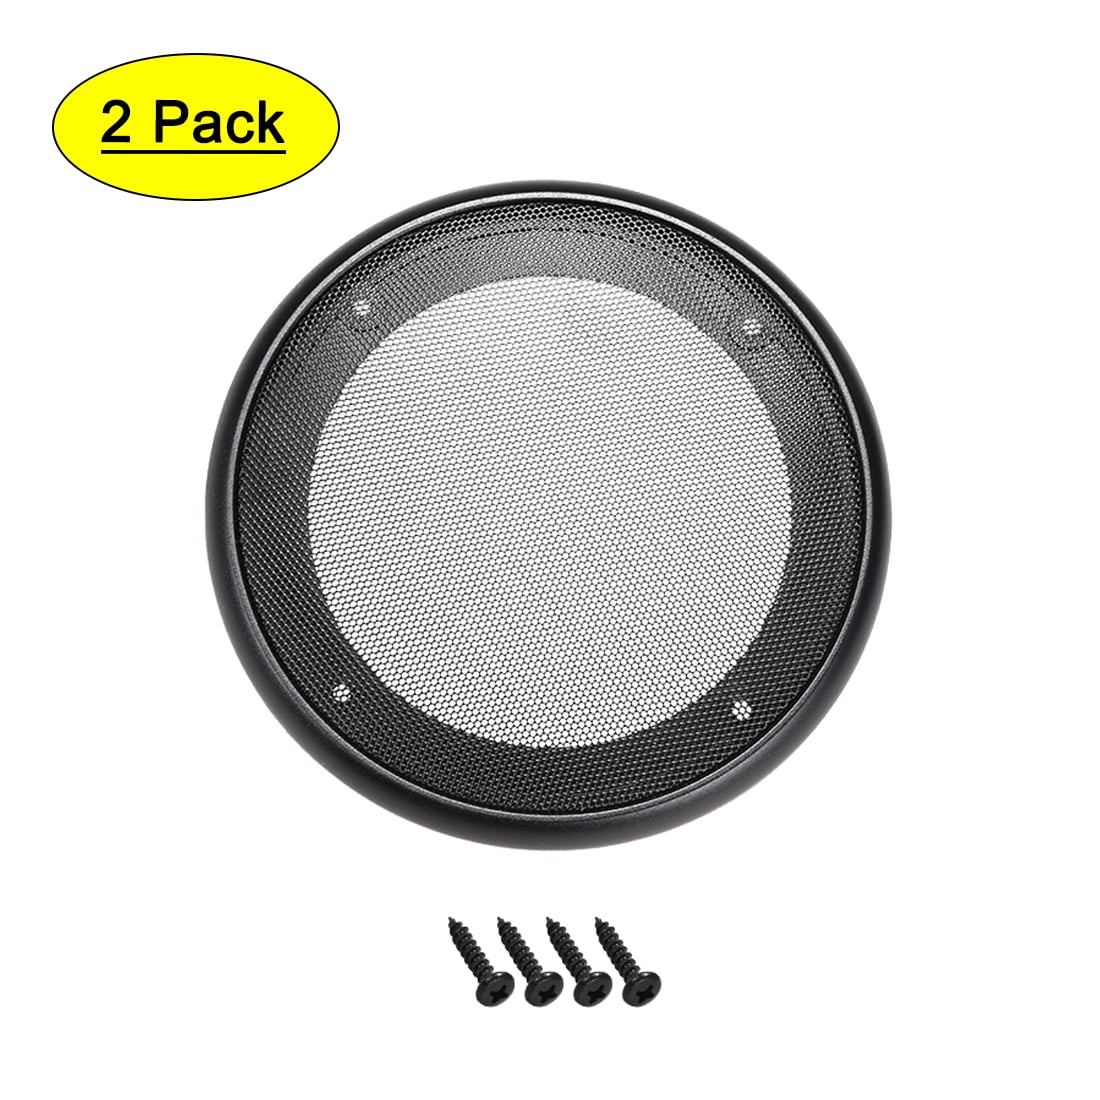 uxcell Speaker Grill Cover 3 Inch 93mm Mesh Decorative Circle Subwoofer Guard Protector Black 2pcs 